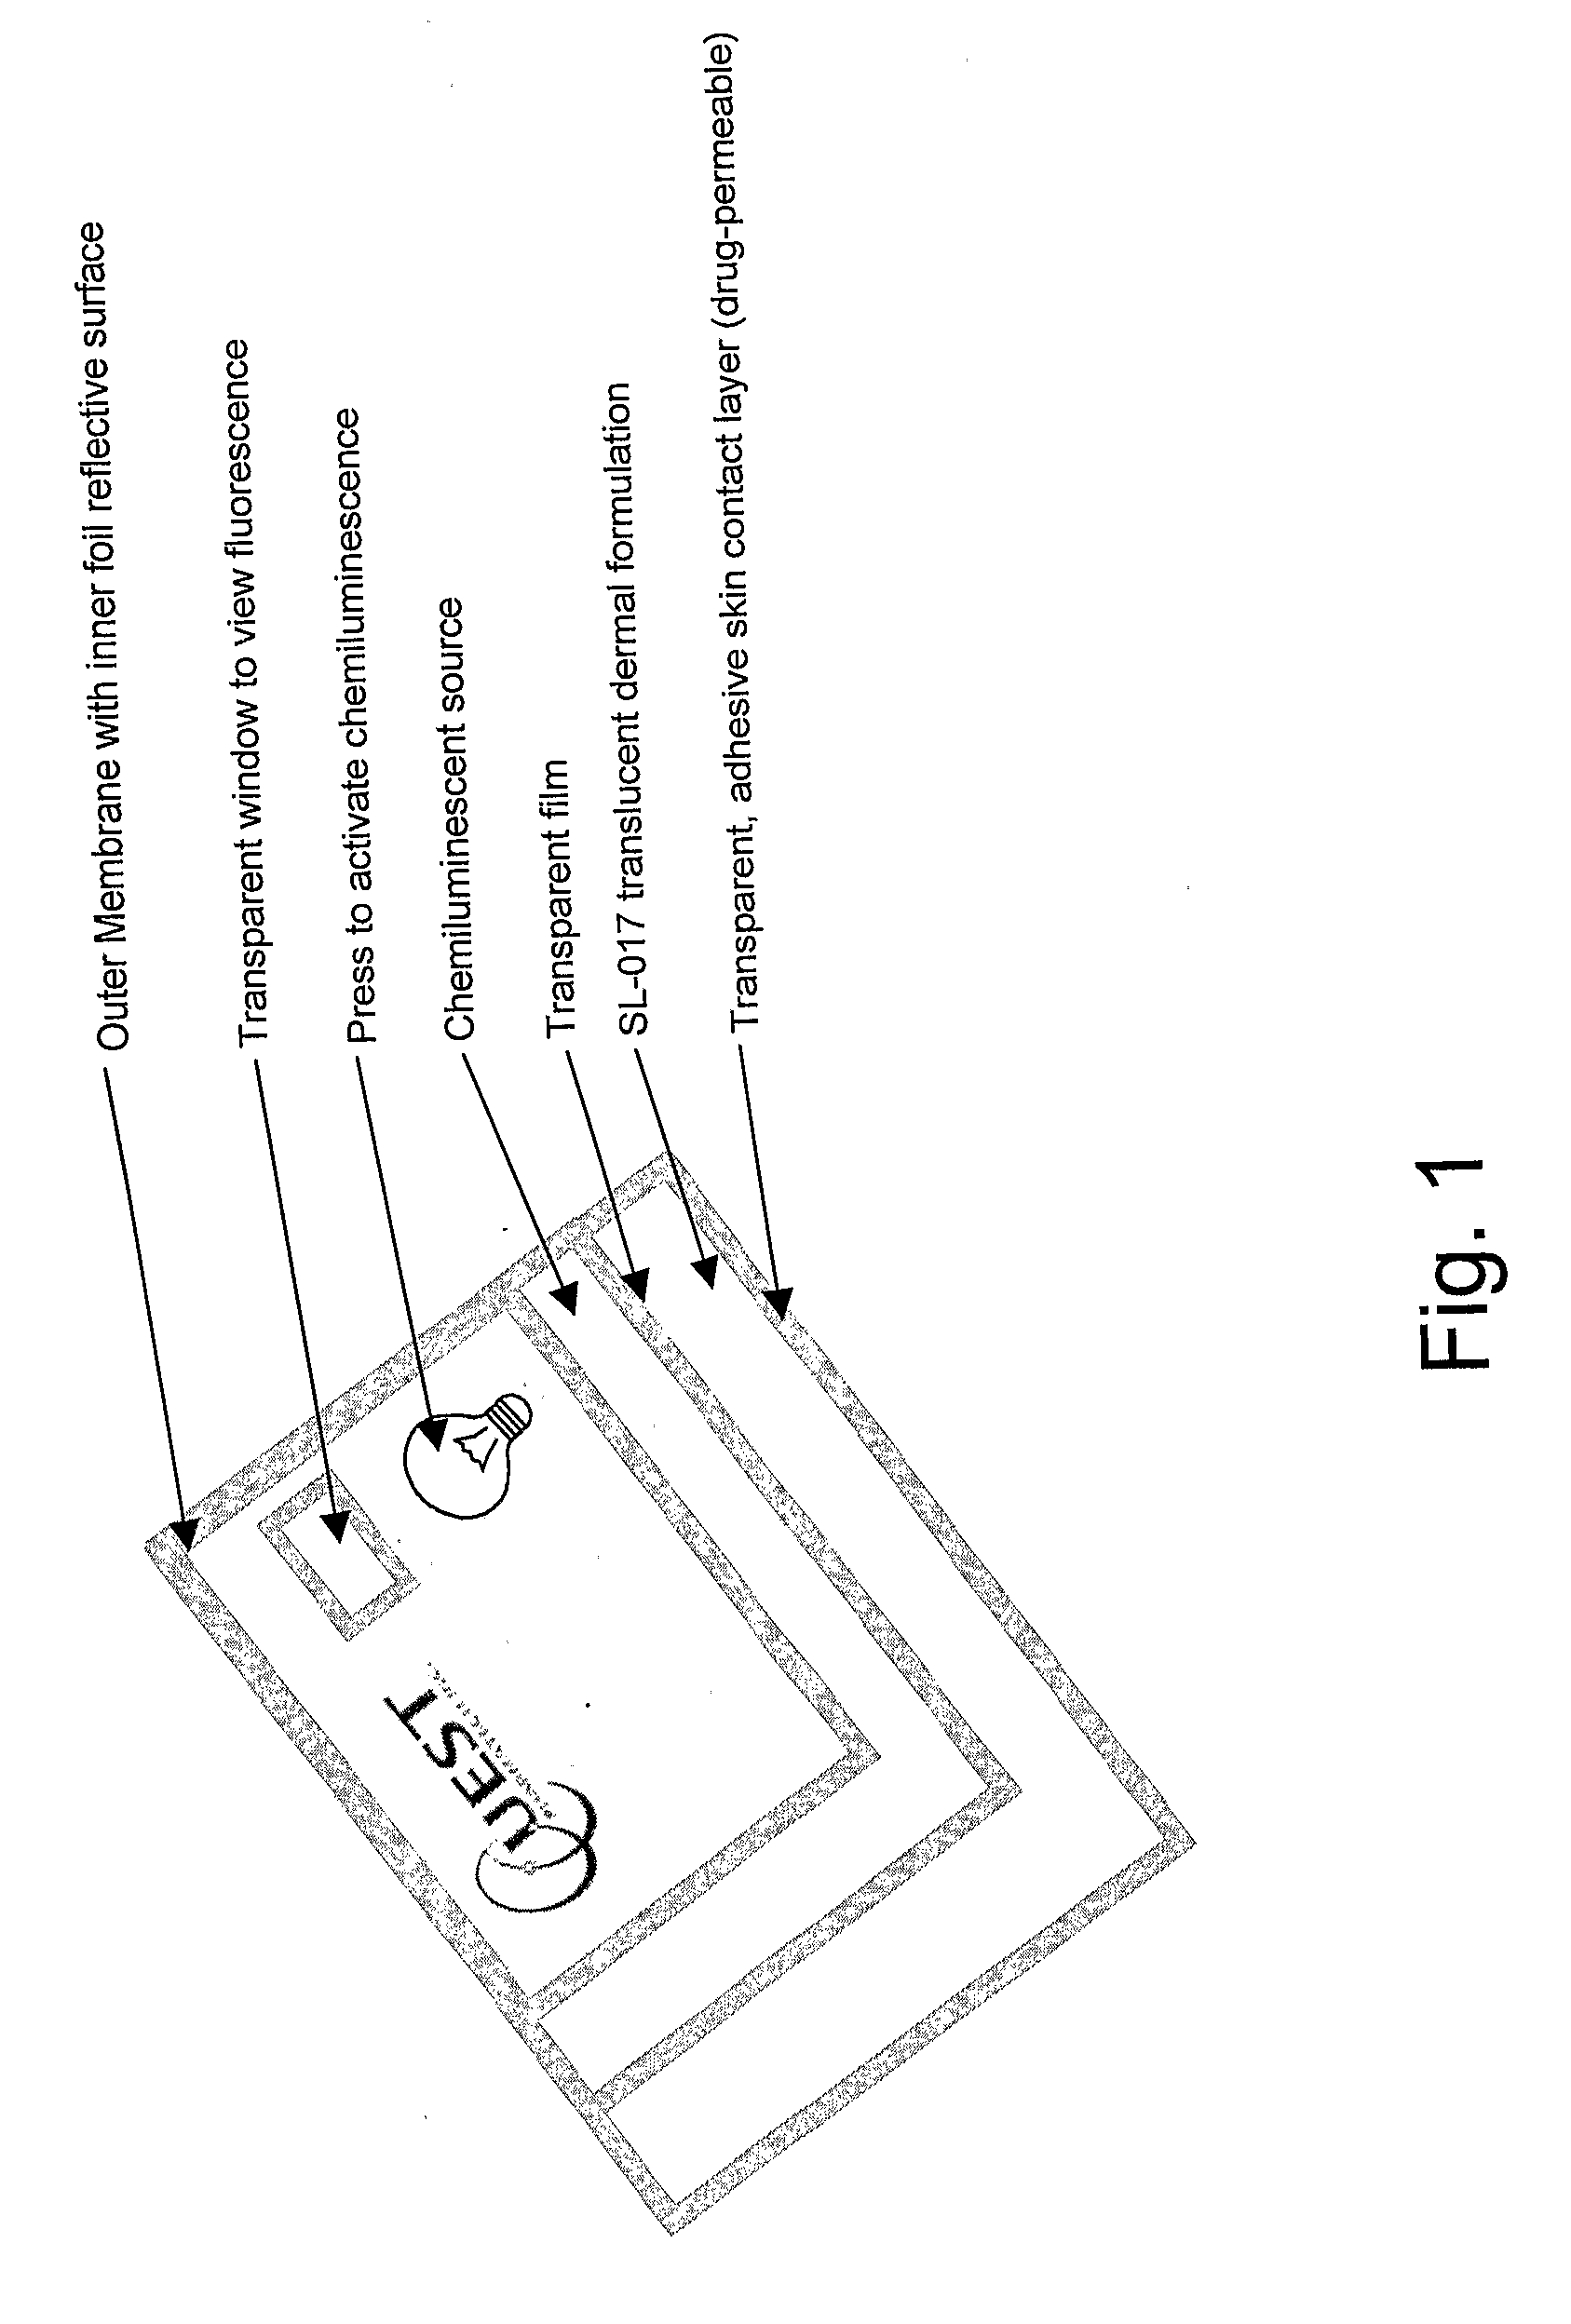 Method and device for photodynamic therapy